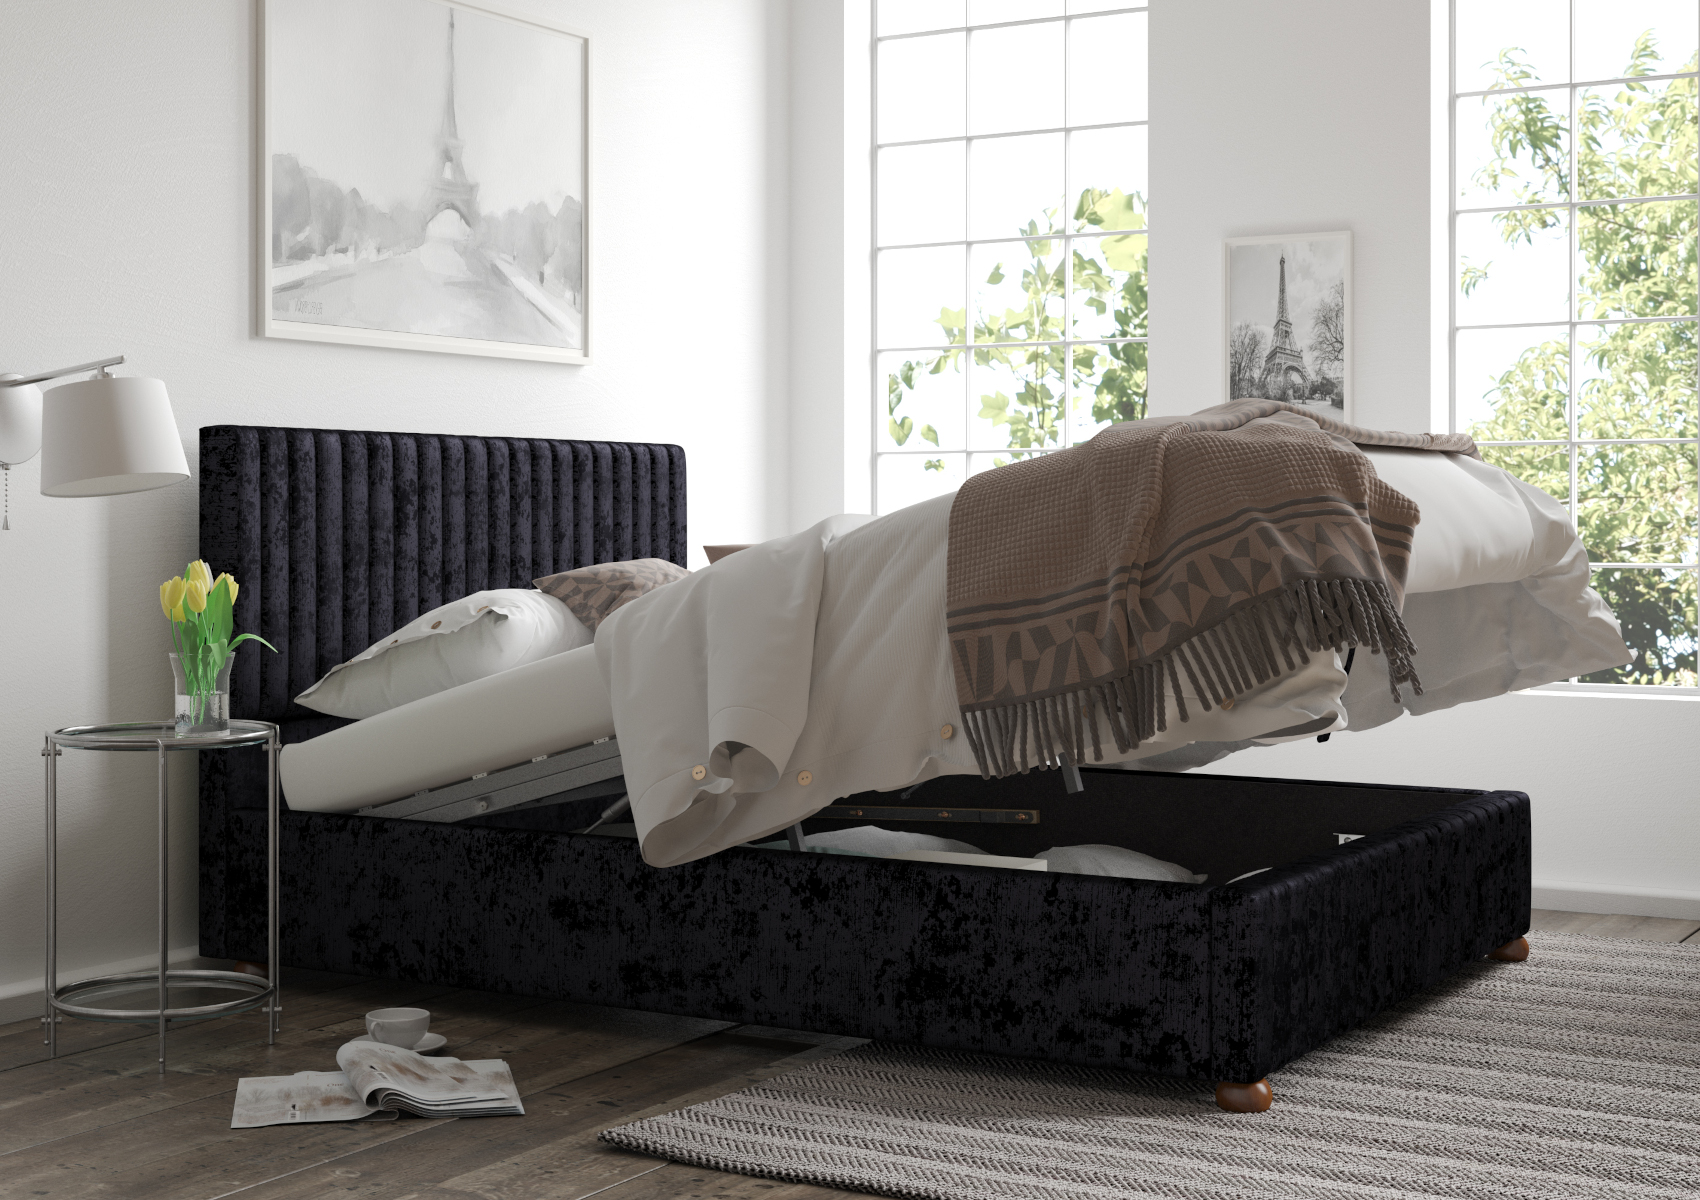 View Naples Upholstered Ottoman Bed Frame Only Time4Sleep information